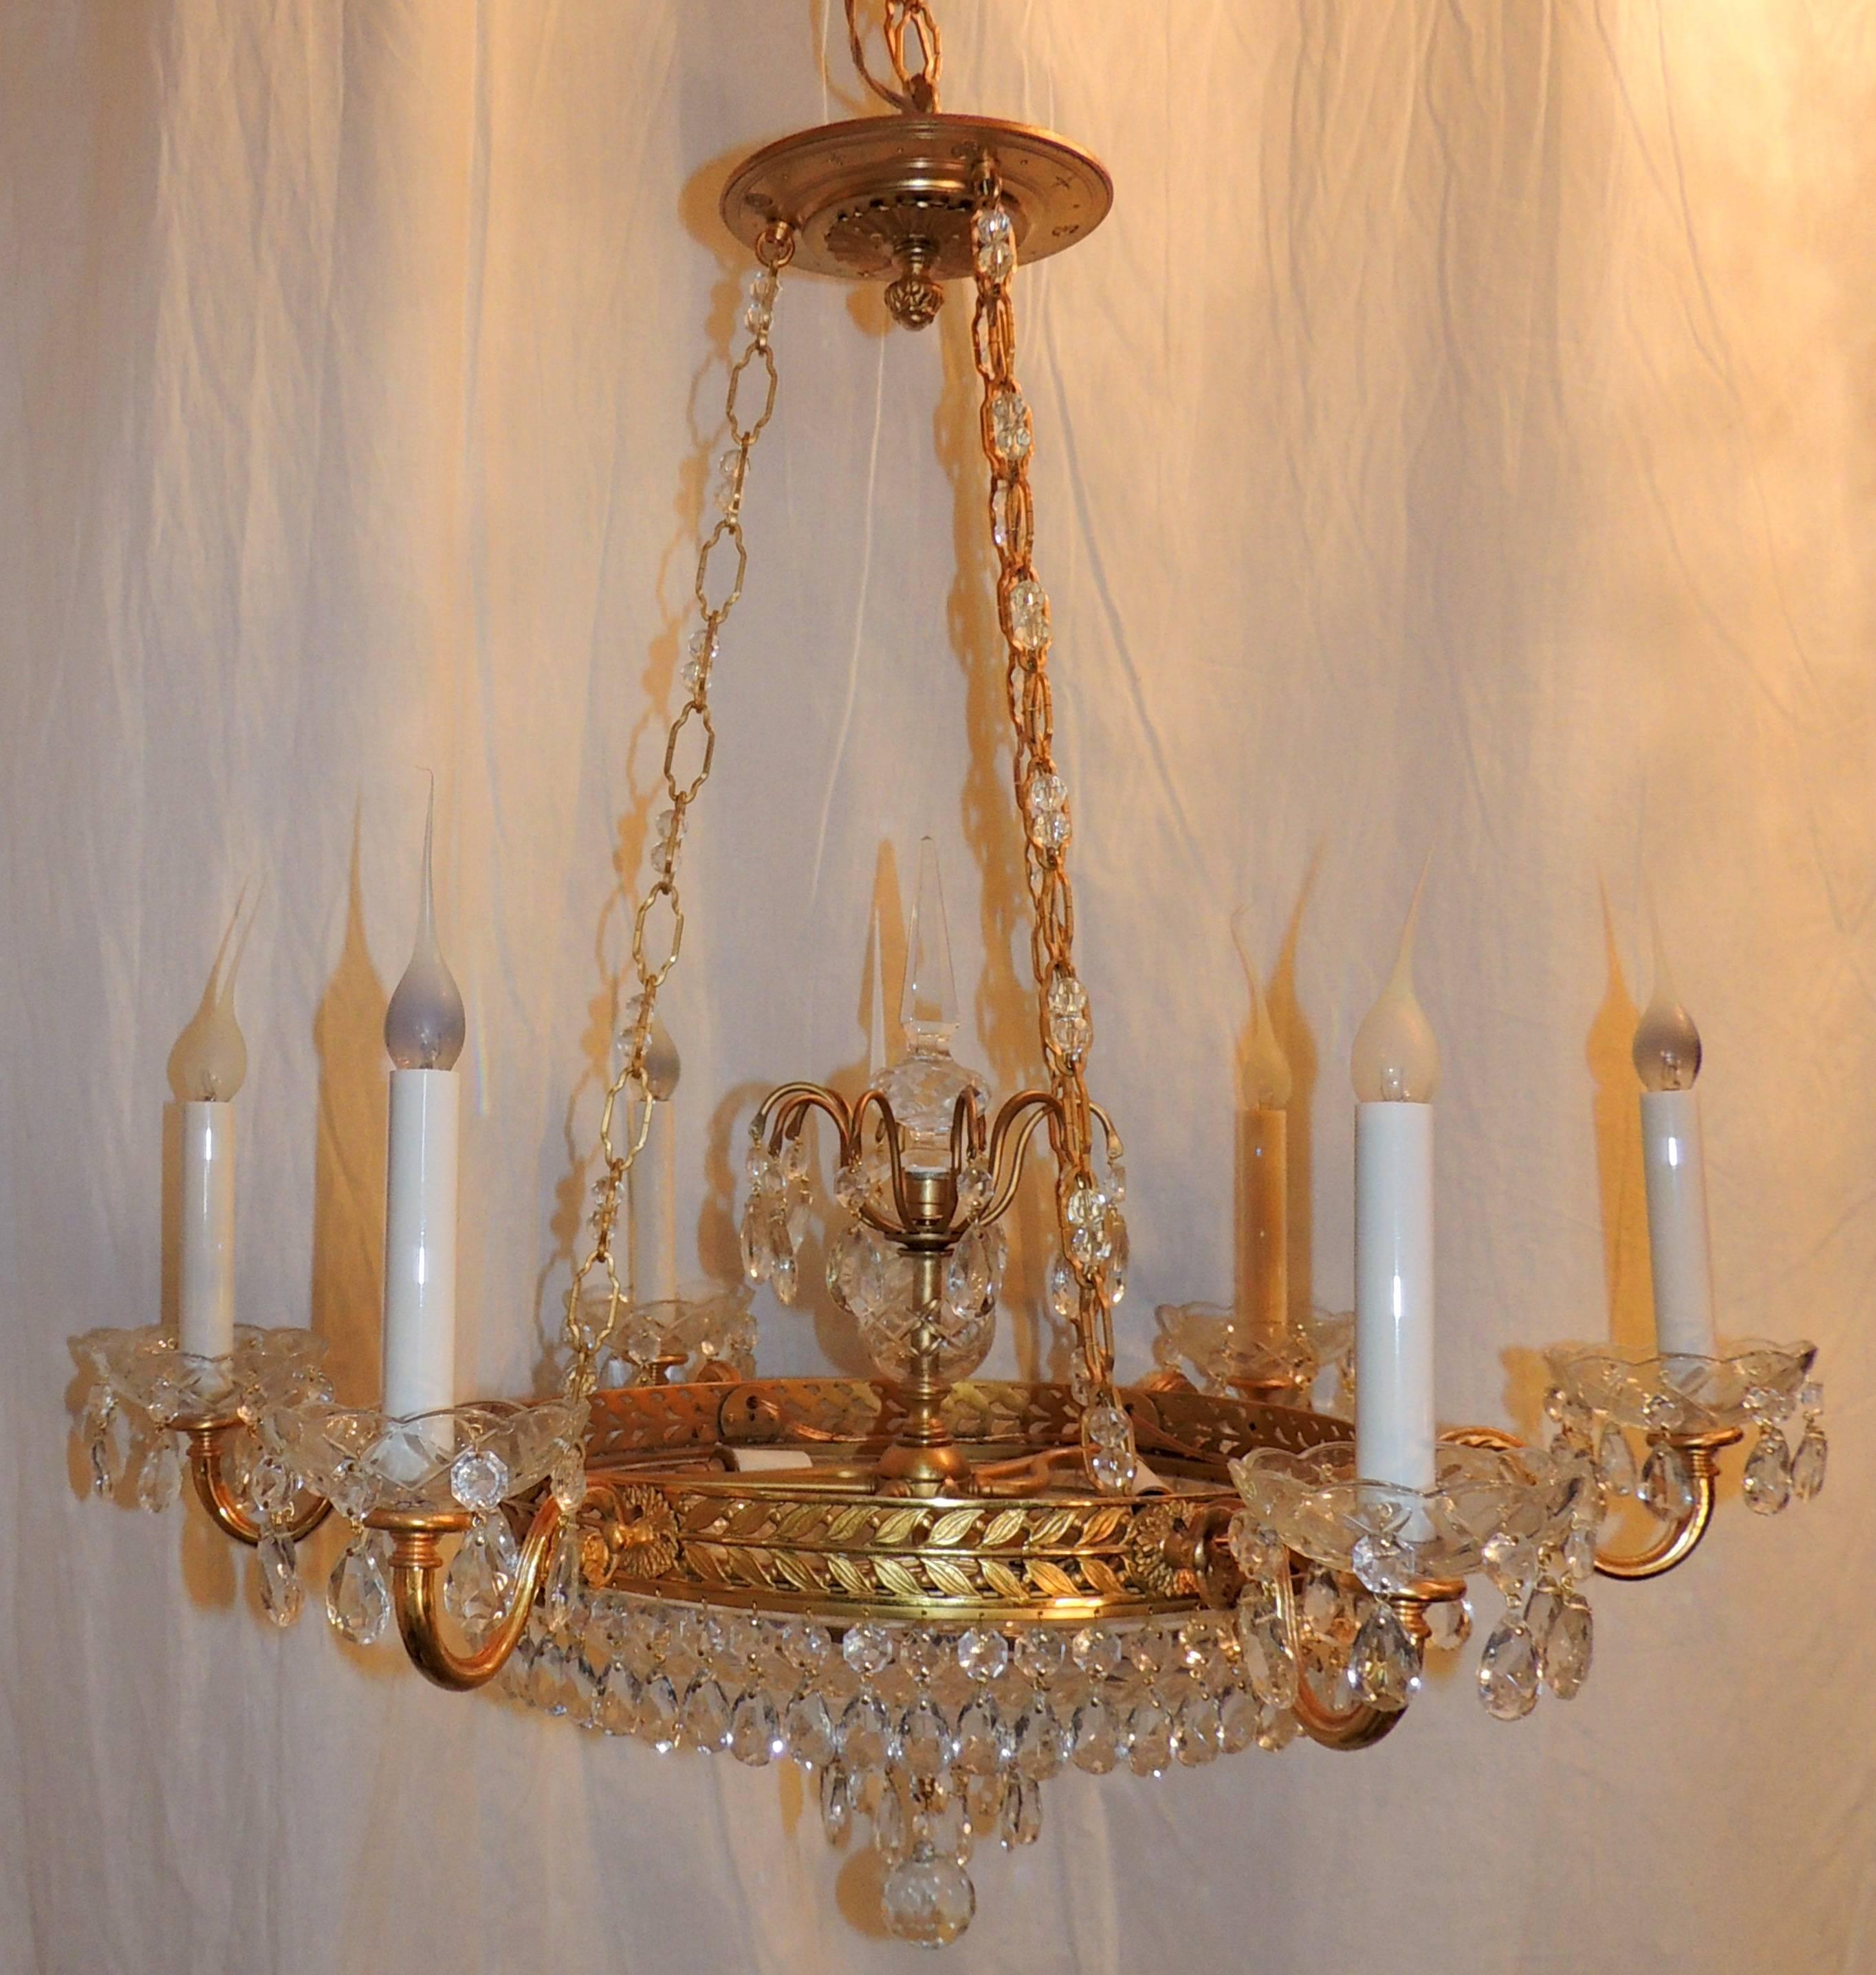 A wonderful French dore bronze neoclassical style Baltic cut crystal bowl Empire chandelier with six lights and three internal lights.